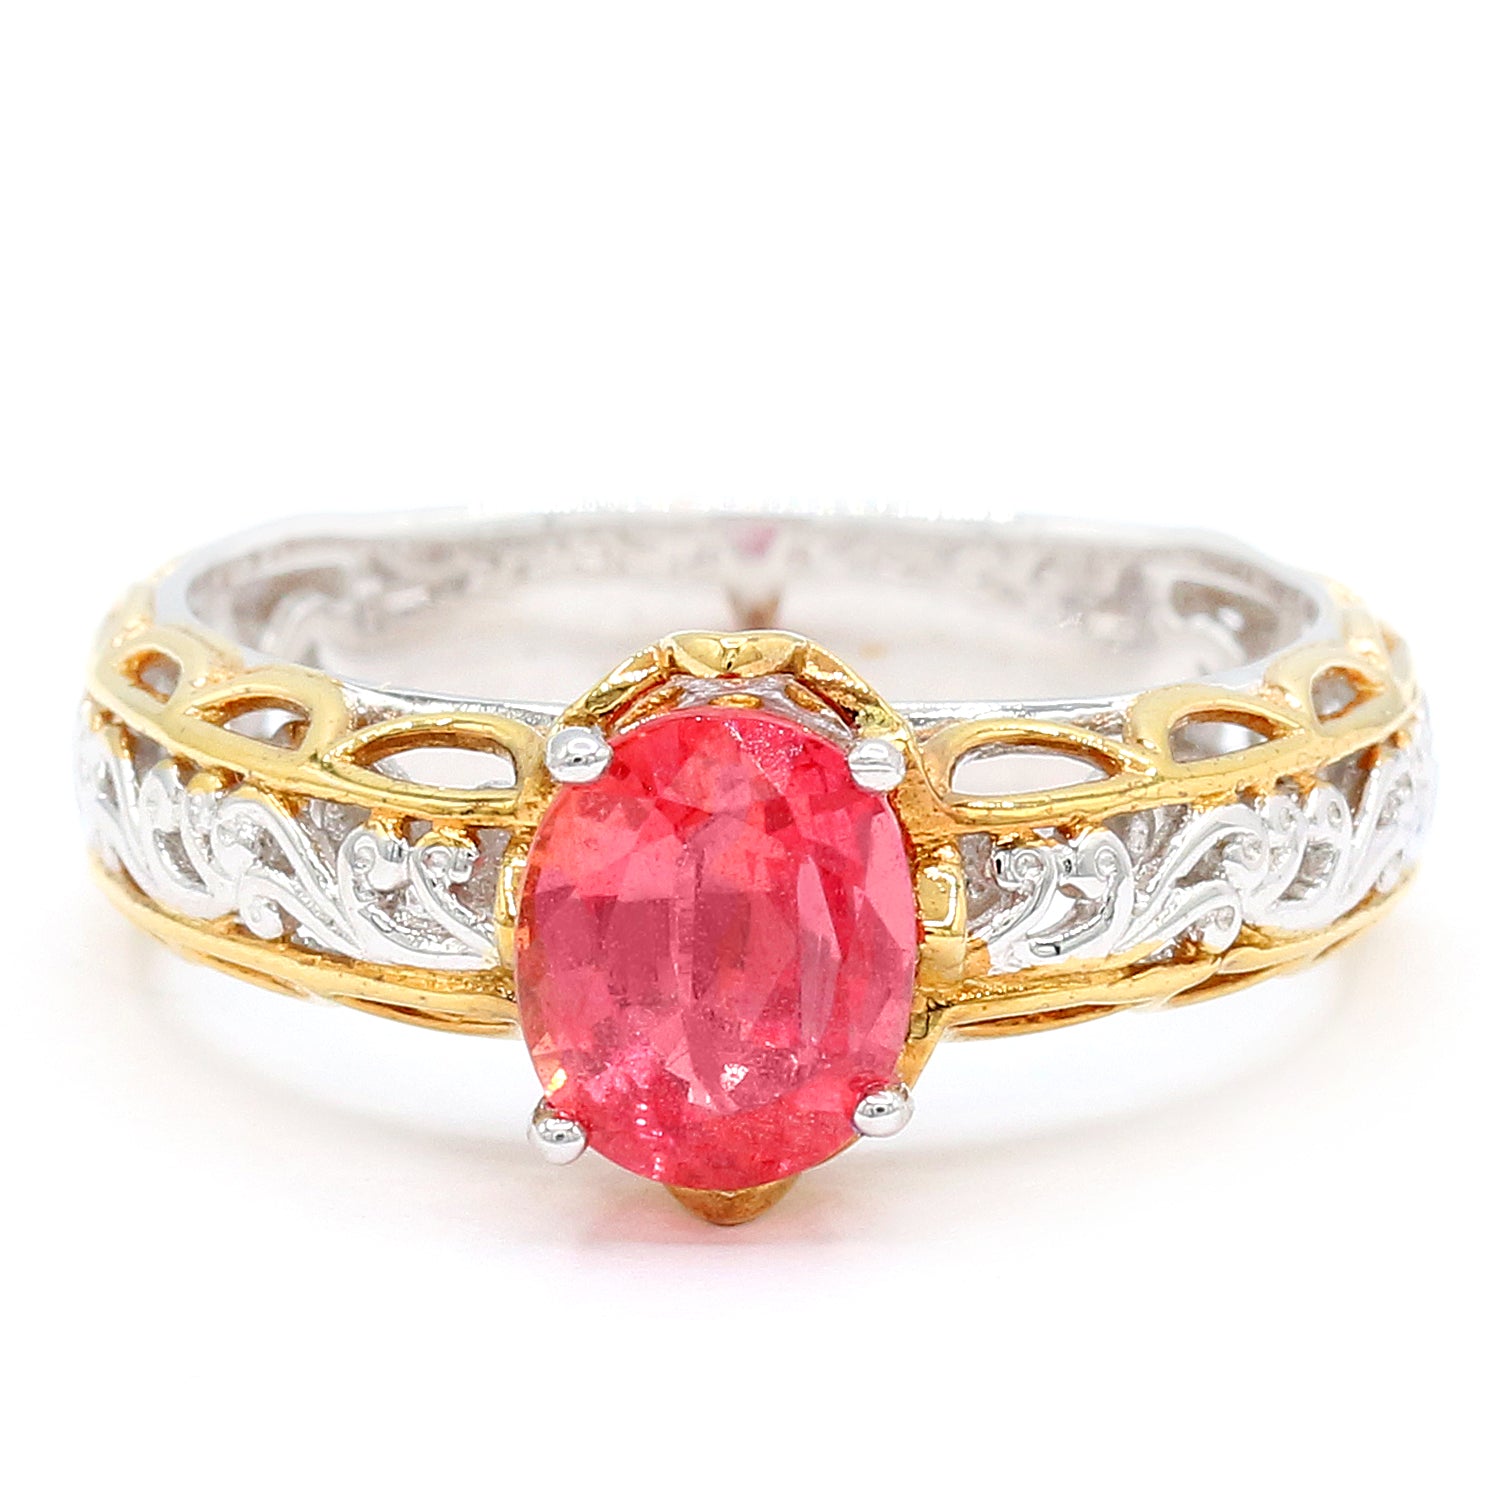 Limited Edition Gems en Vogue Luxe, One-of-a-Kind 2.11ctw Padparadscha Sapphire Ring